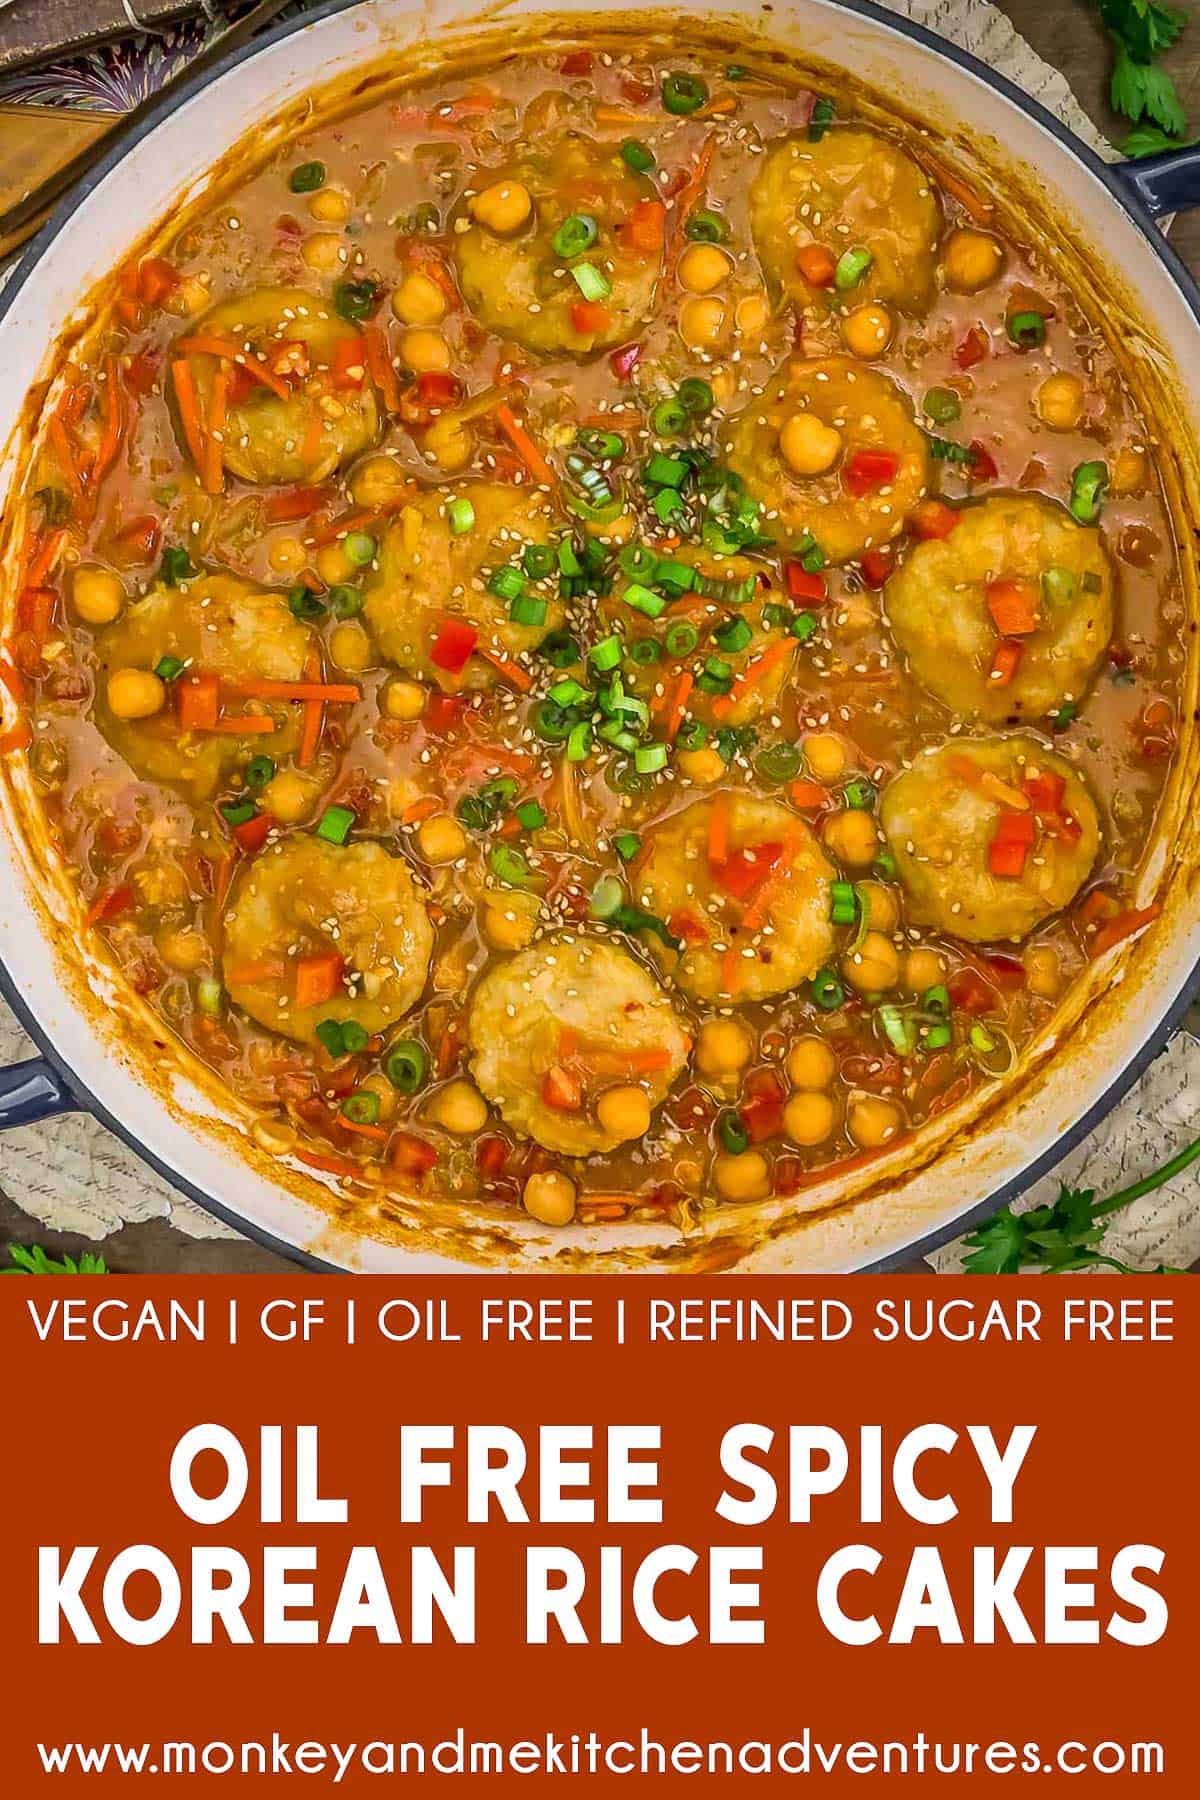 Oil Free Spicy Korean Rice Cakes with Text Description